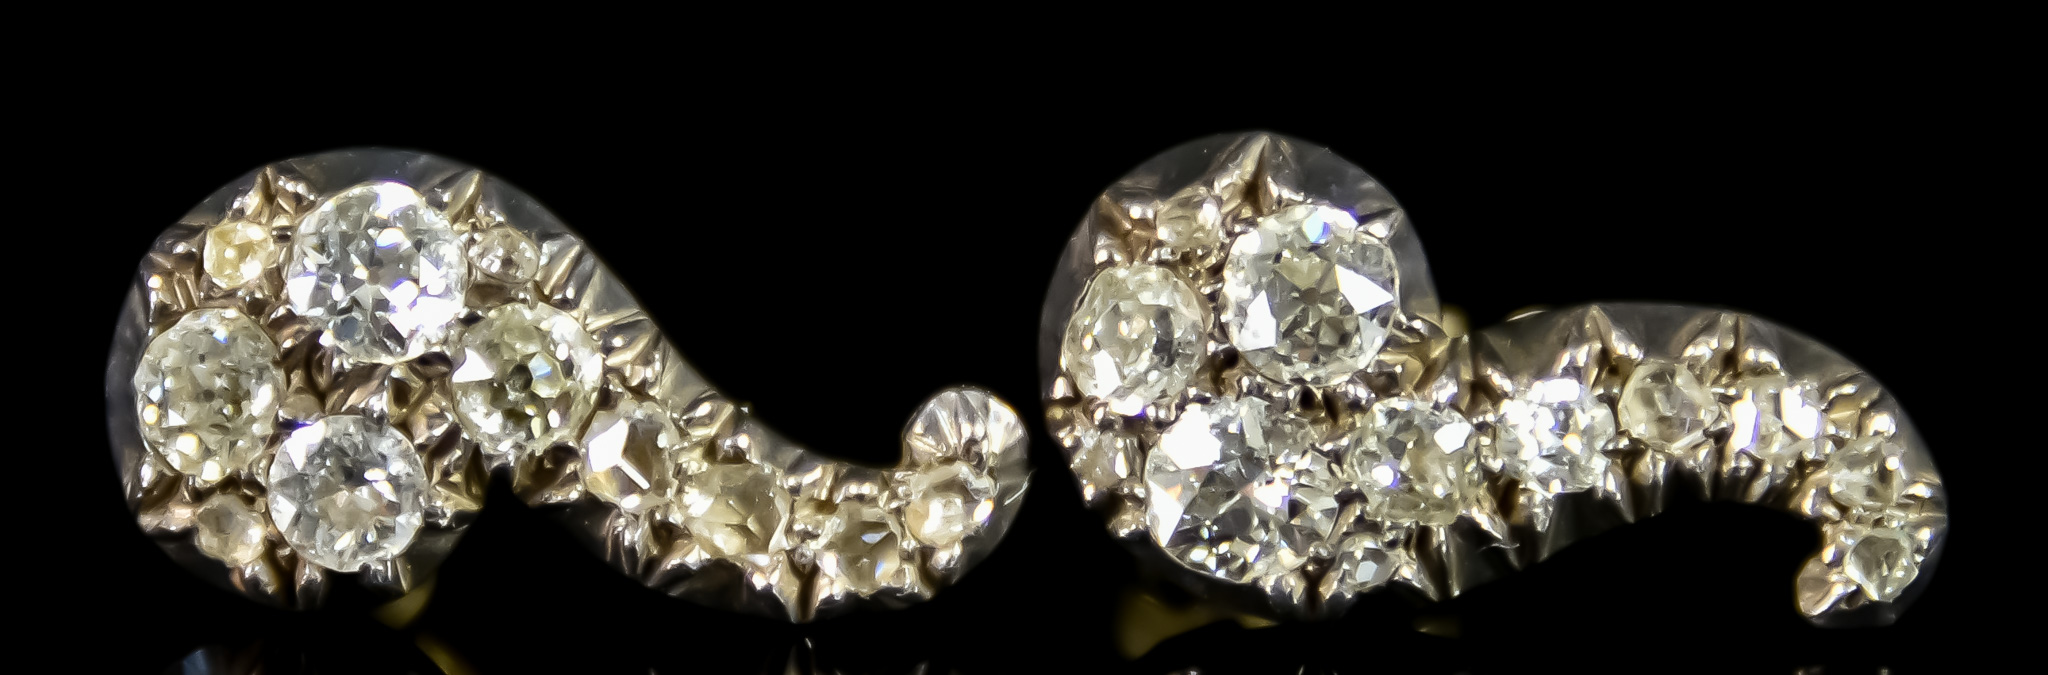 A Pair of Diamond Set Earrings, Late 19th/ Early 20th Century, for pierced ears, set with old